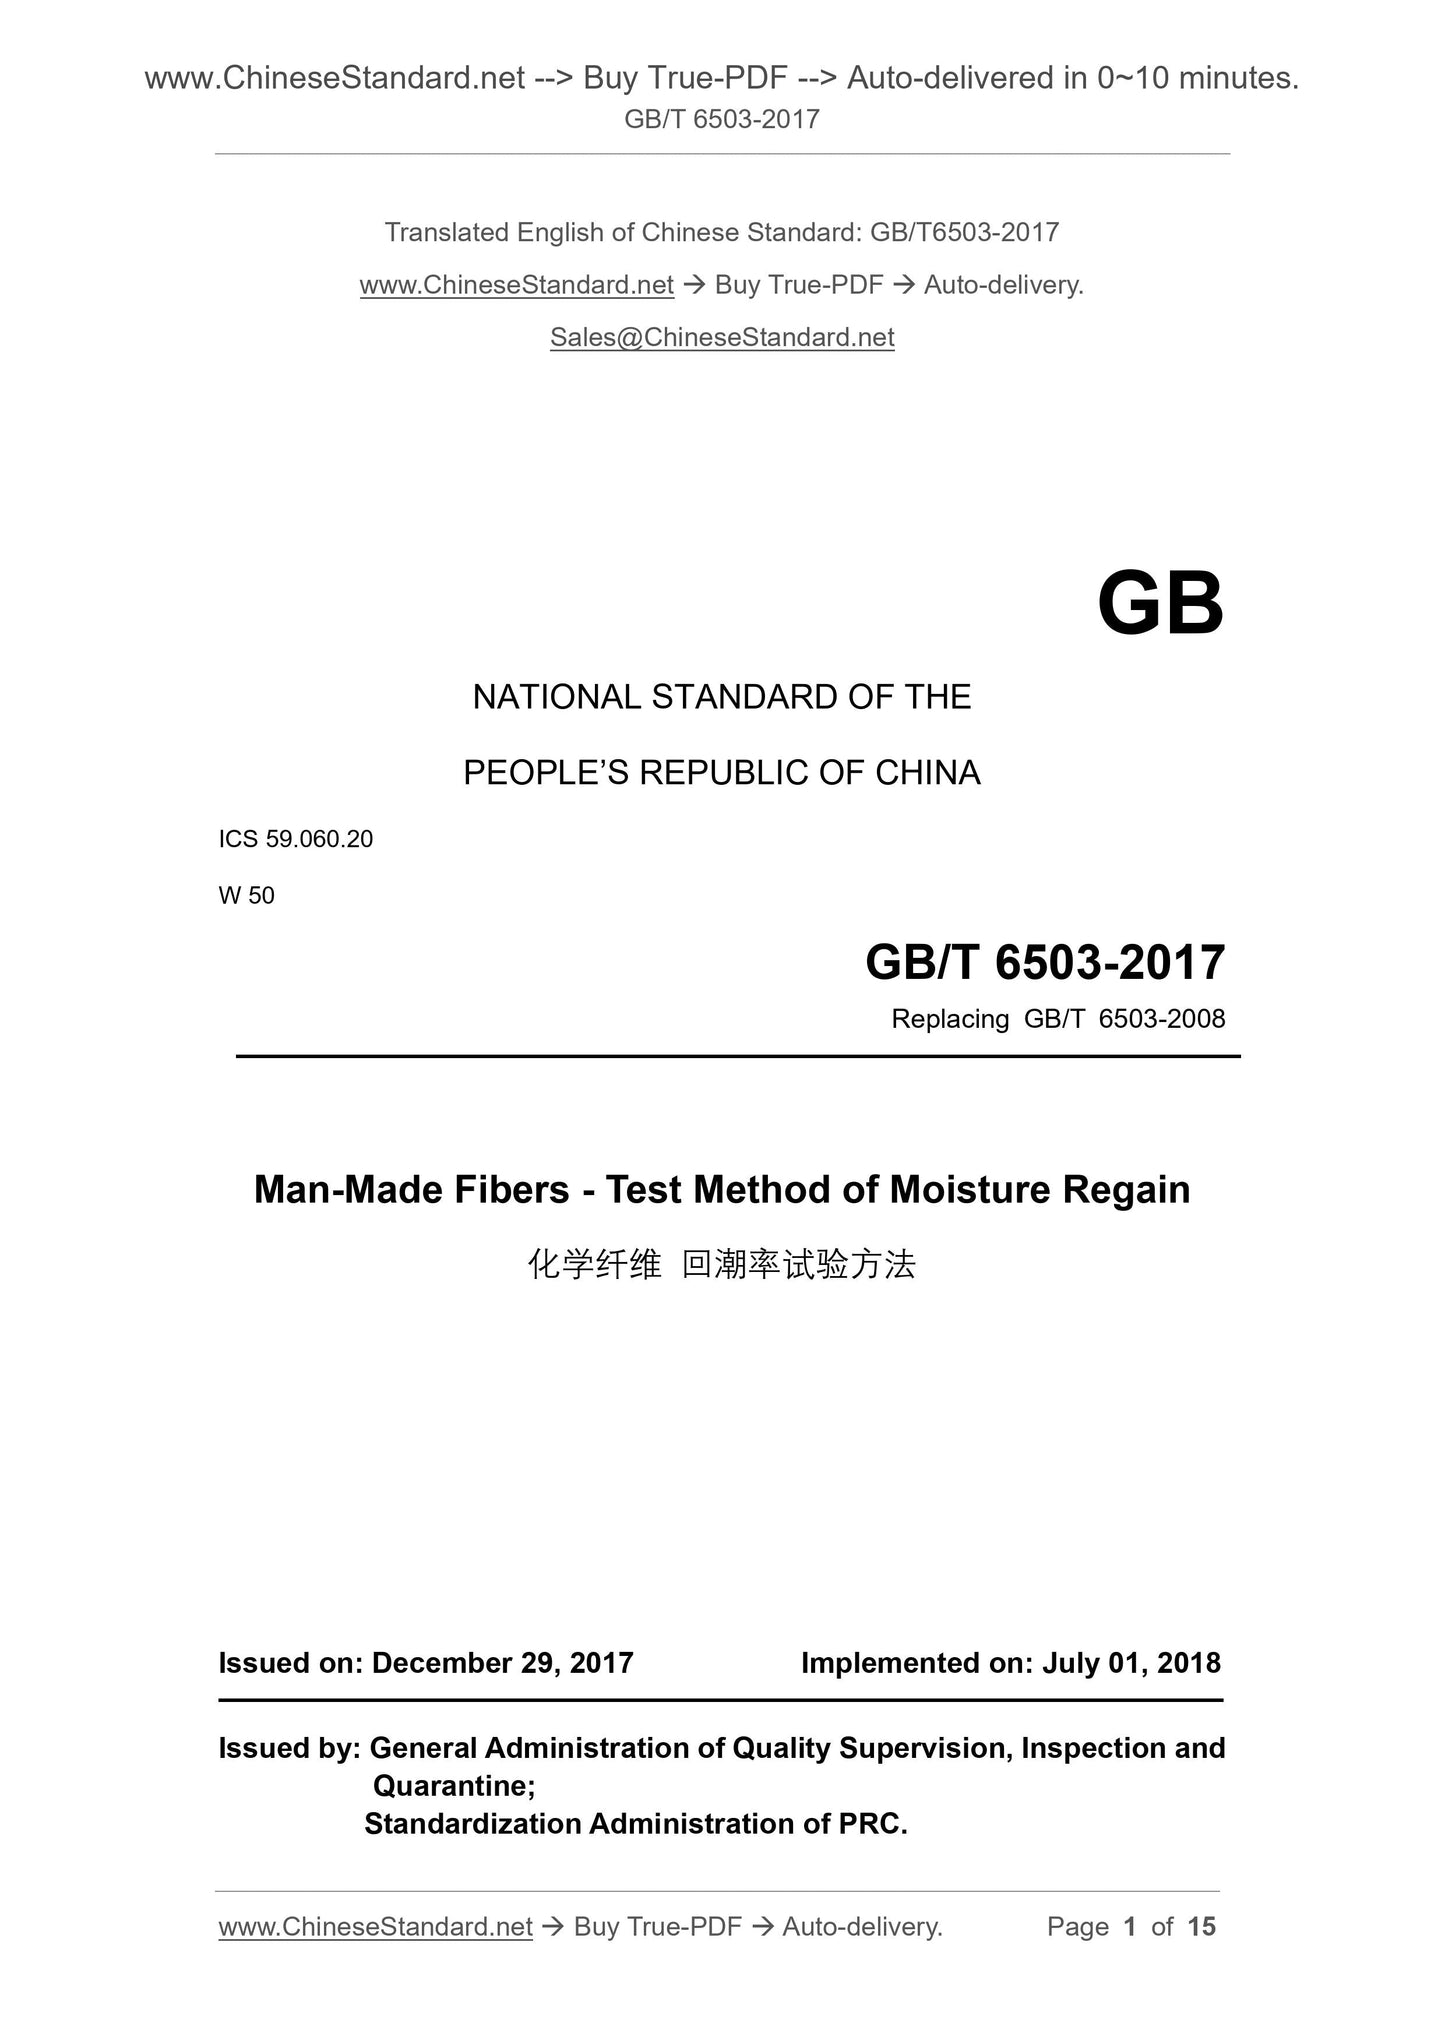 GB/T 6503-2017 Page 1